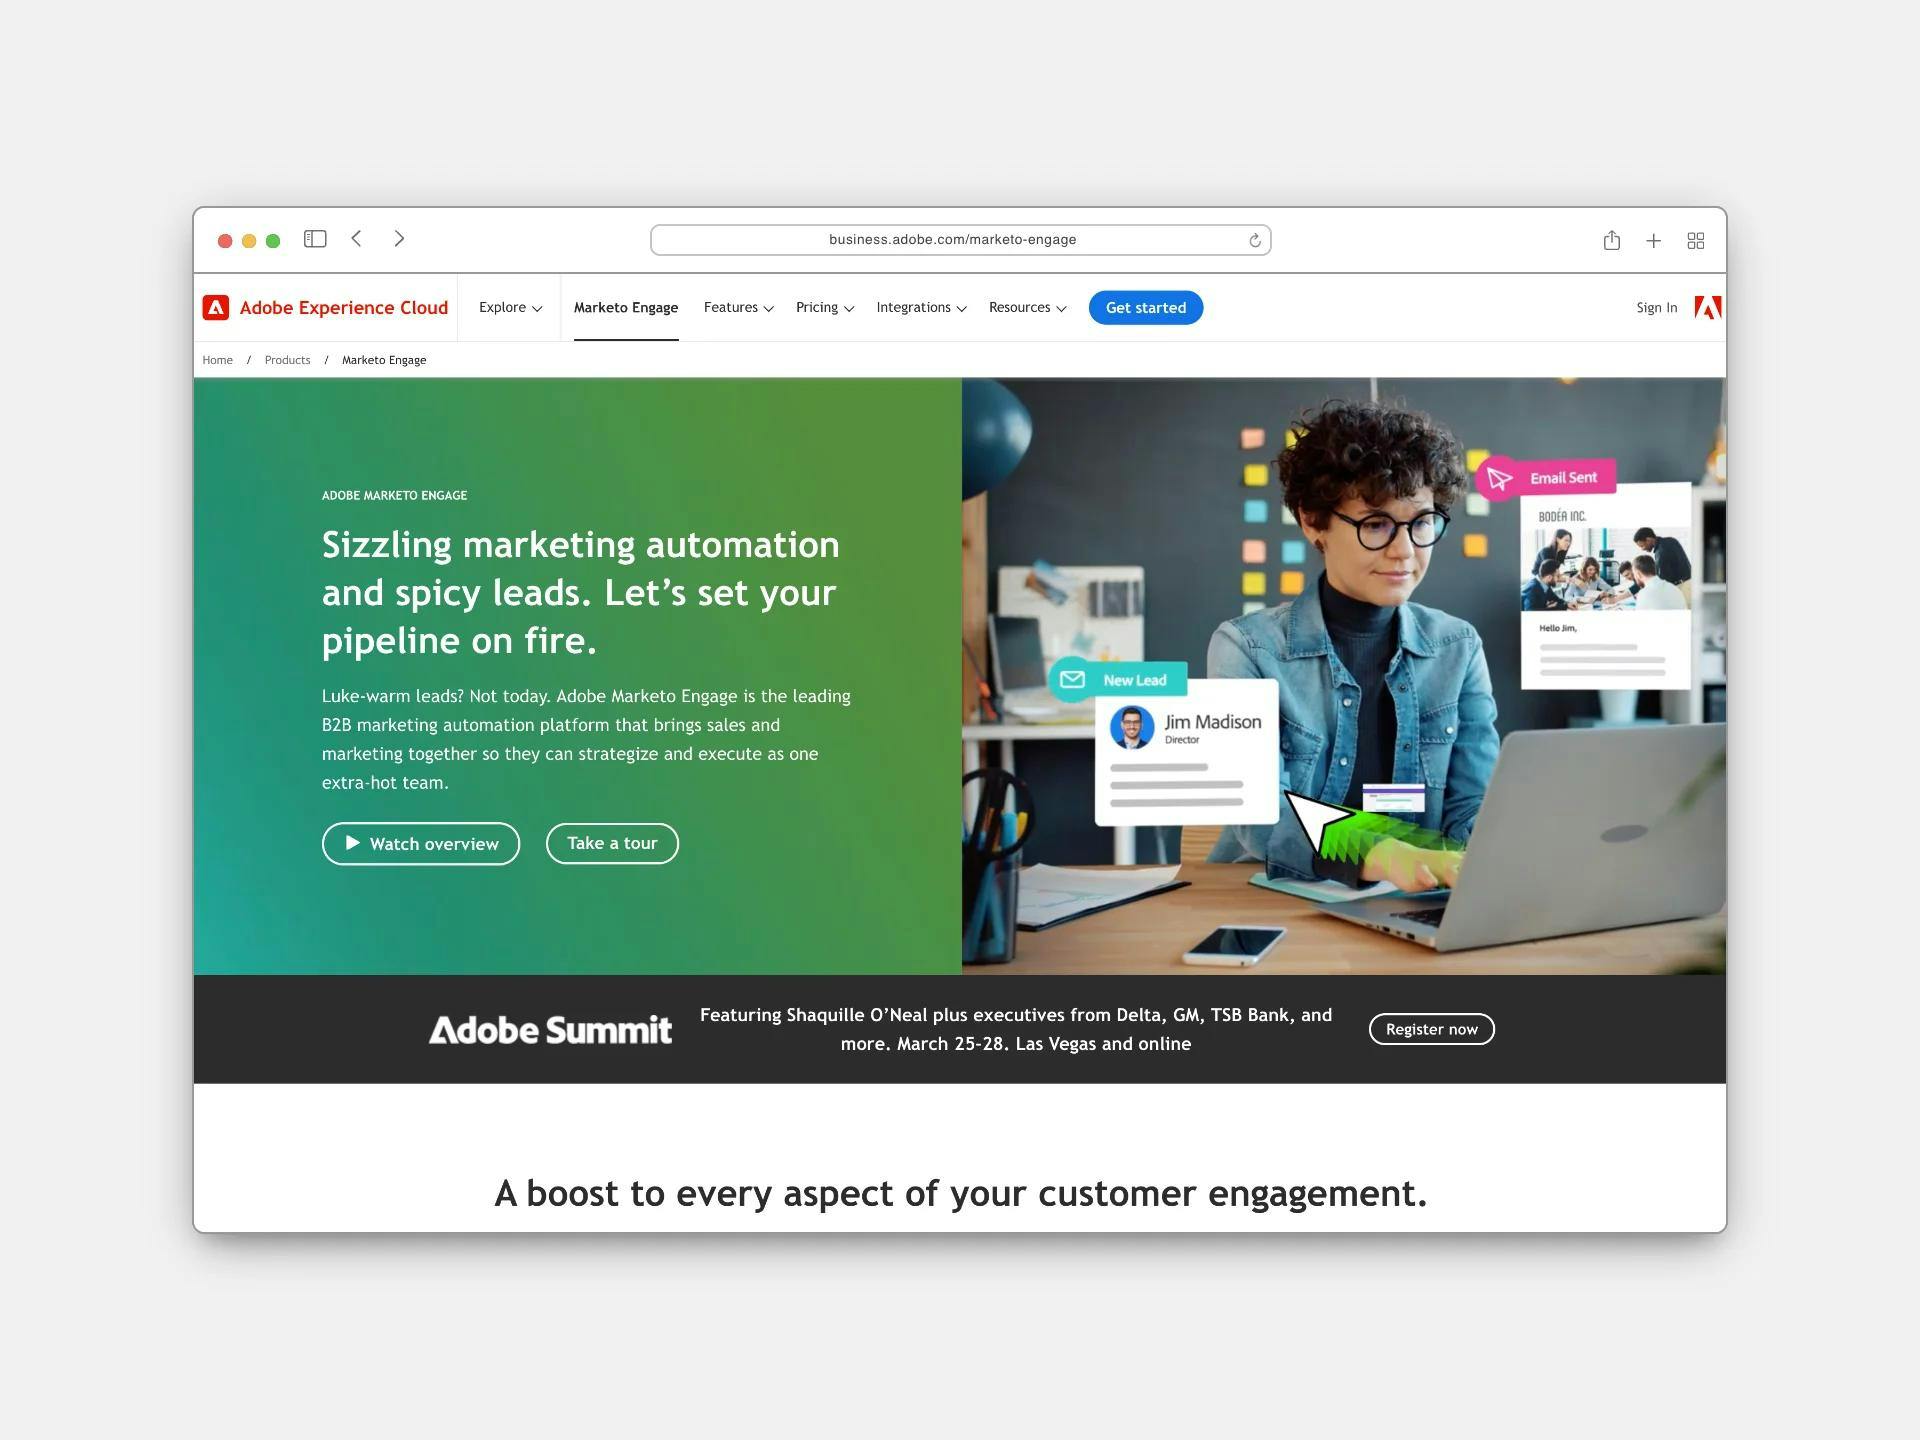 The landing page of MarketoEngage, a marketing app from the Adobe Experience Cloud